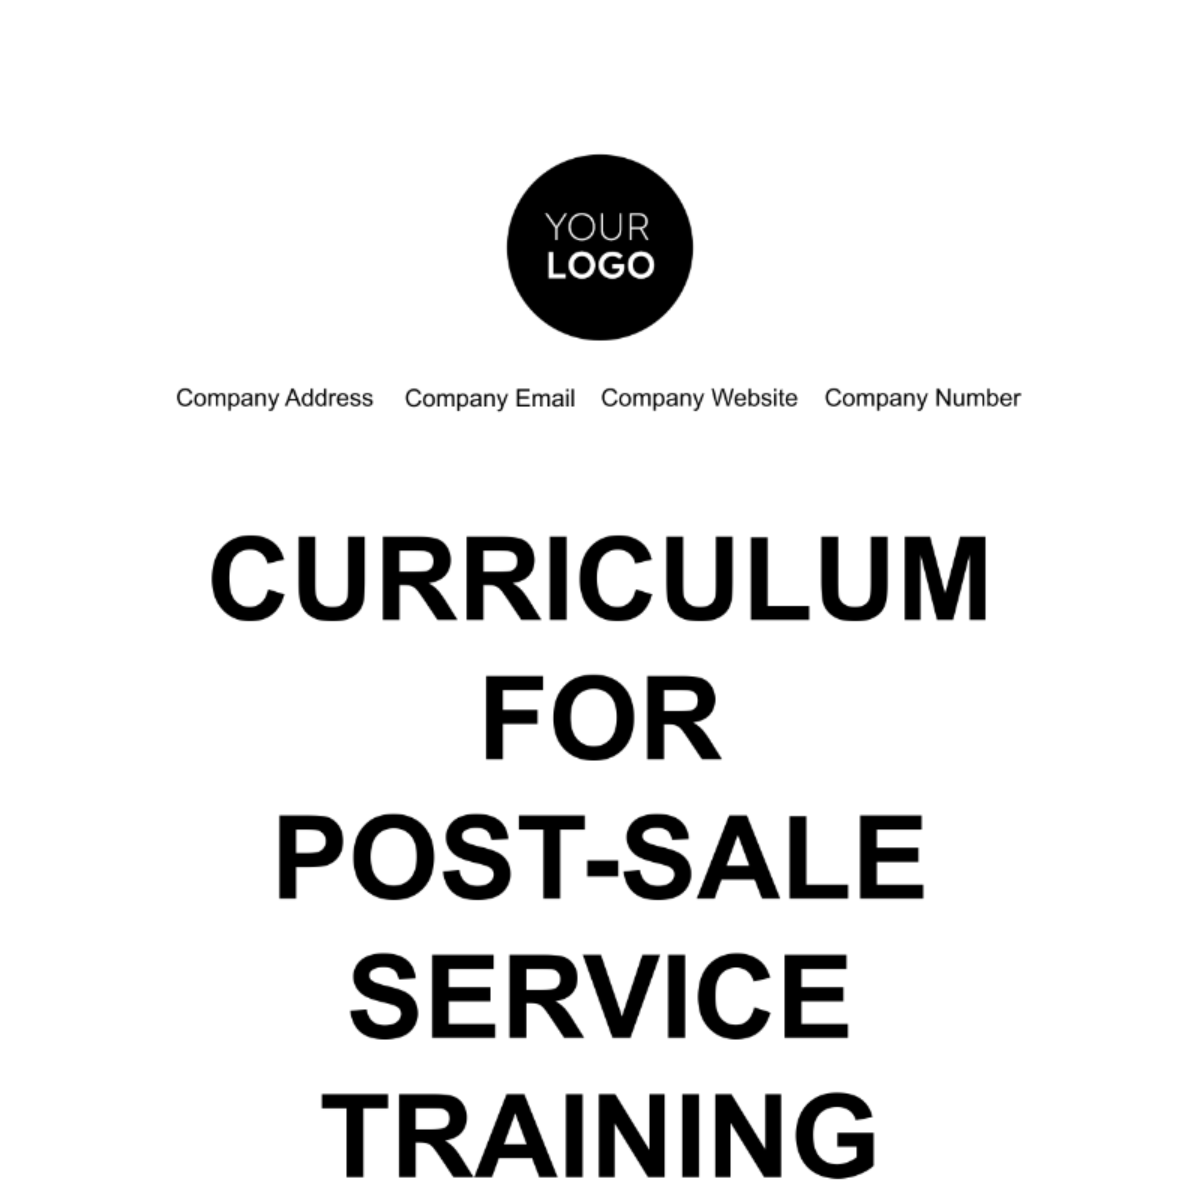 Free Curriculum for Post-Sale Service Training Template